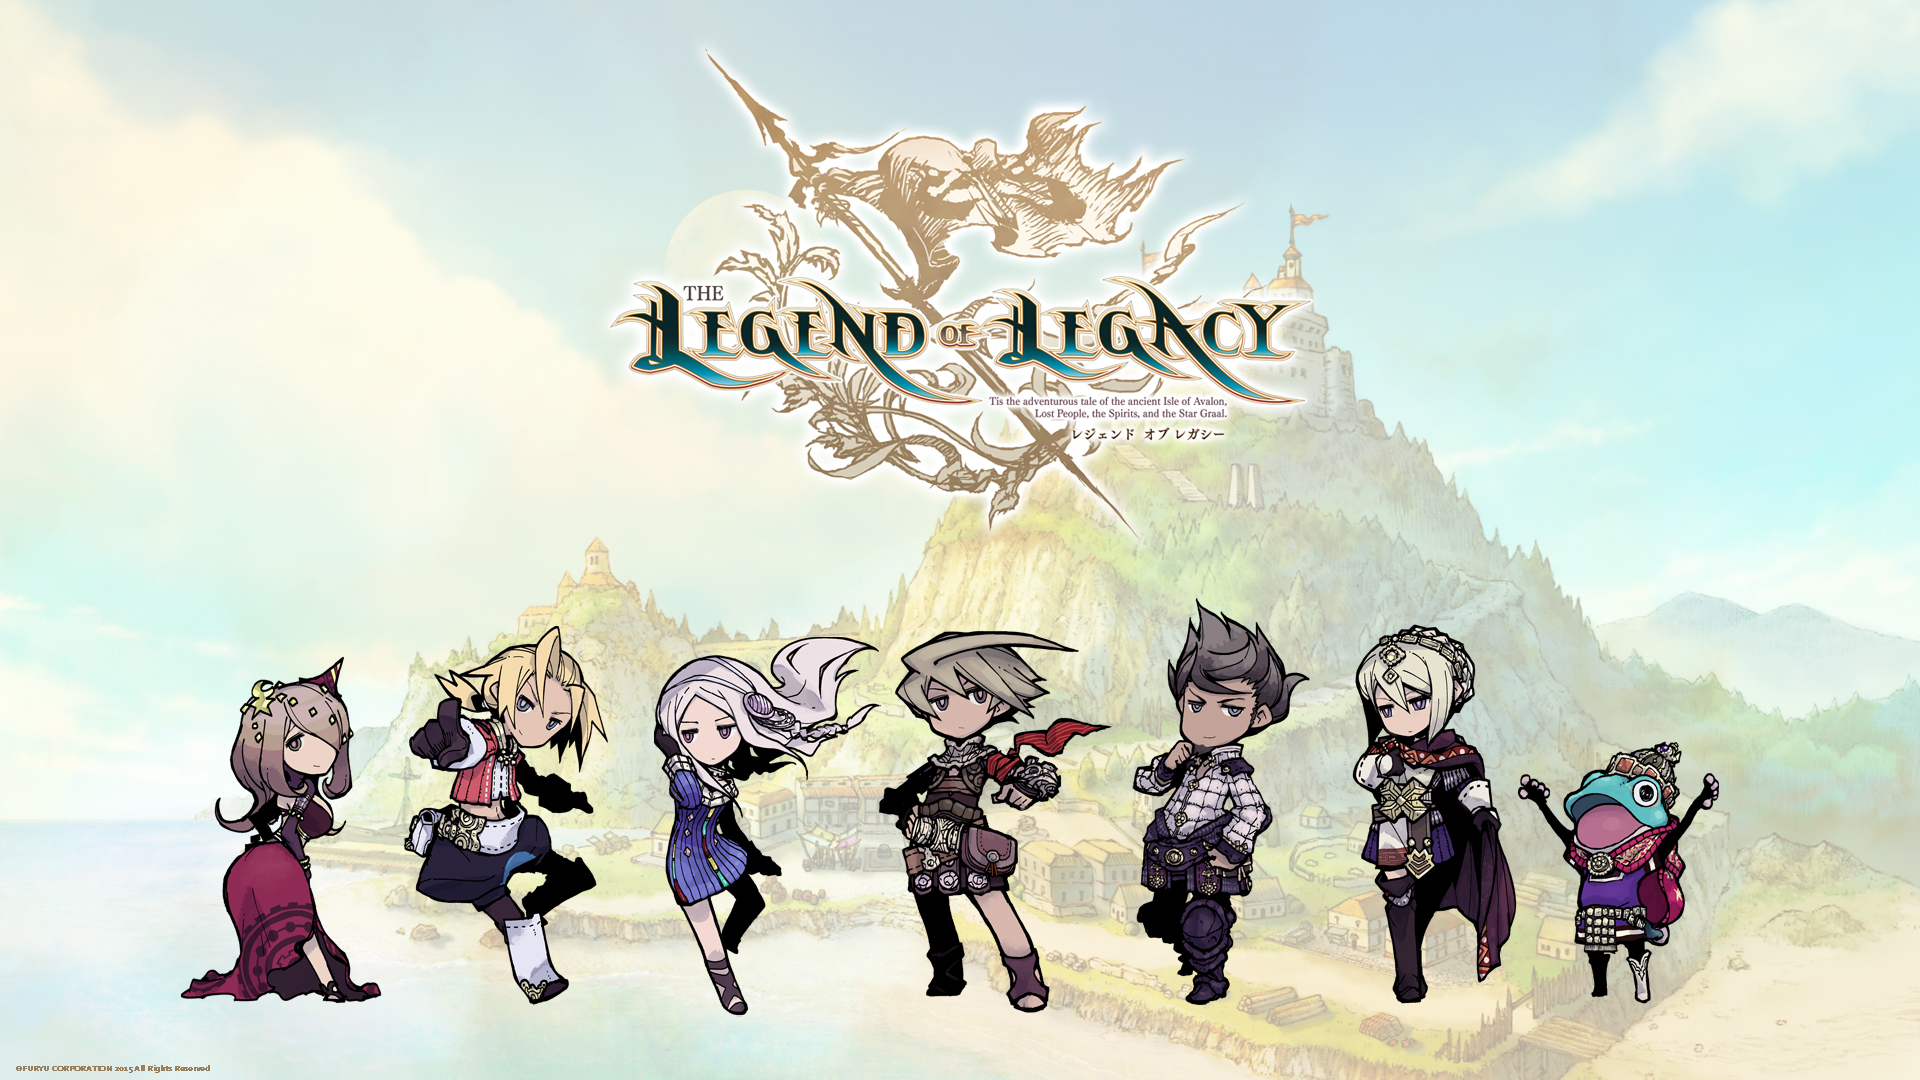 The legend of legacy. The Legend of Legacy 3ds. The Legend of Legacy Turkey. Be the Legend.